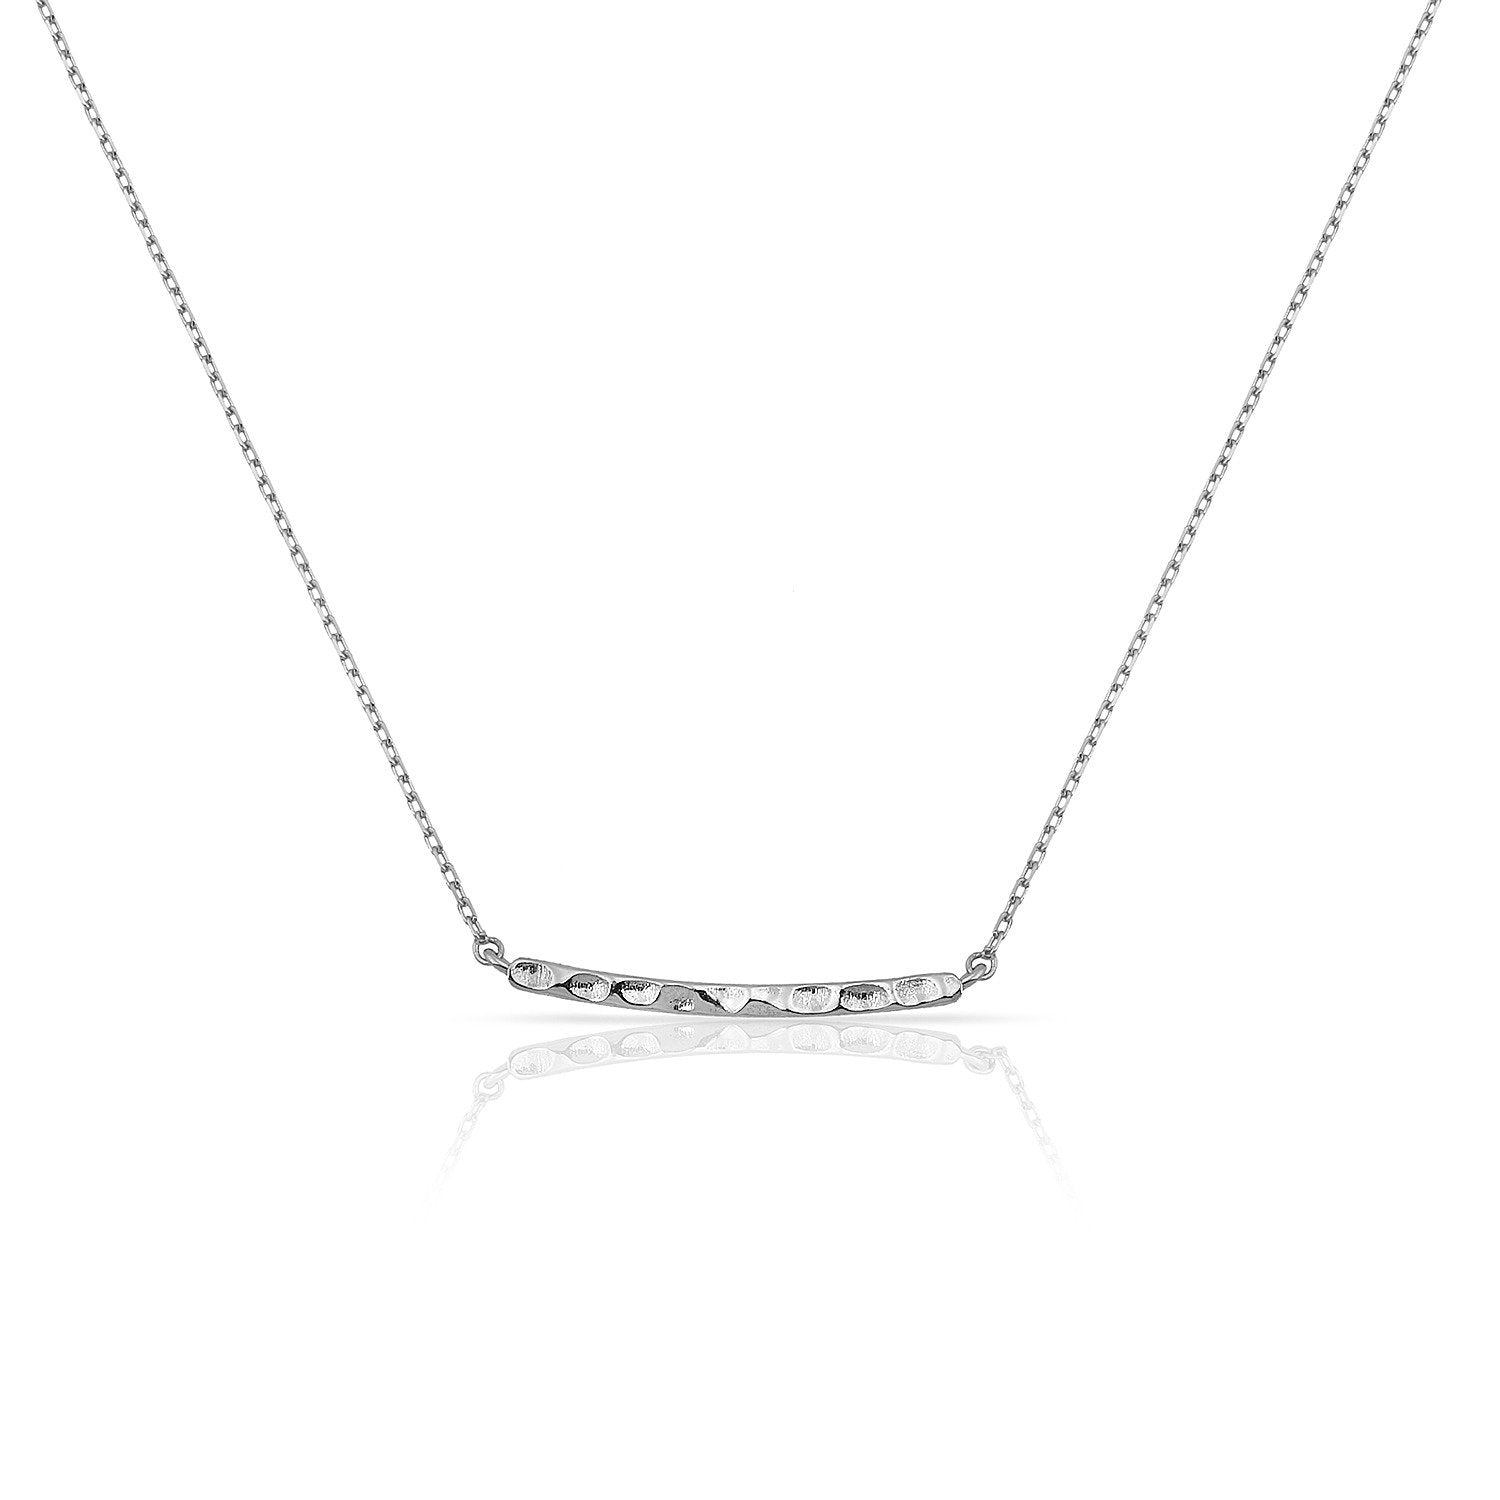 Loverly Hammered Bar Necklace JEWELRY The Sis Kiss Silver